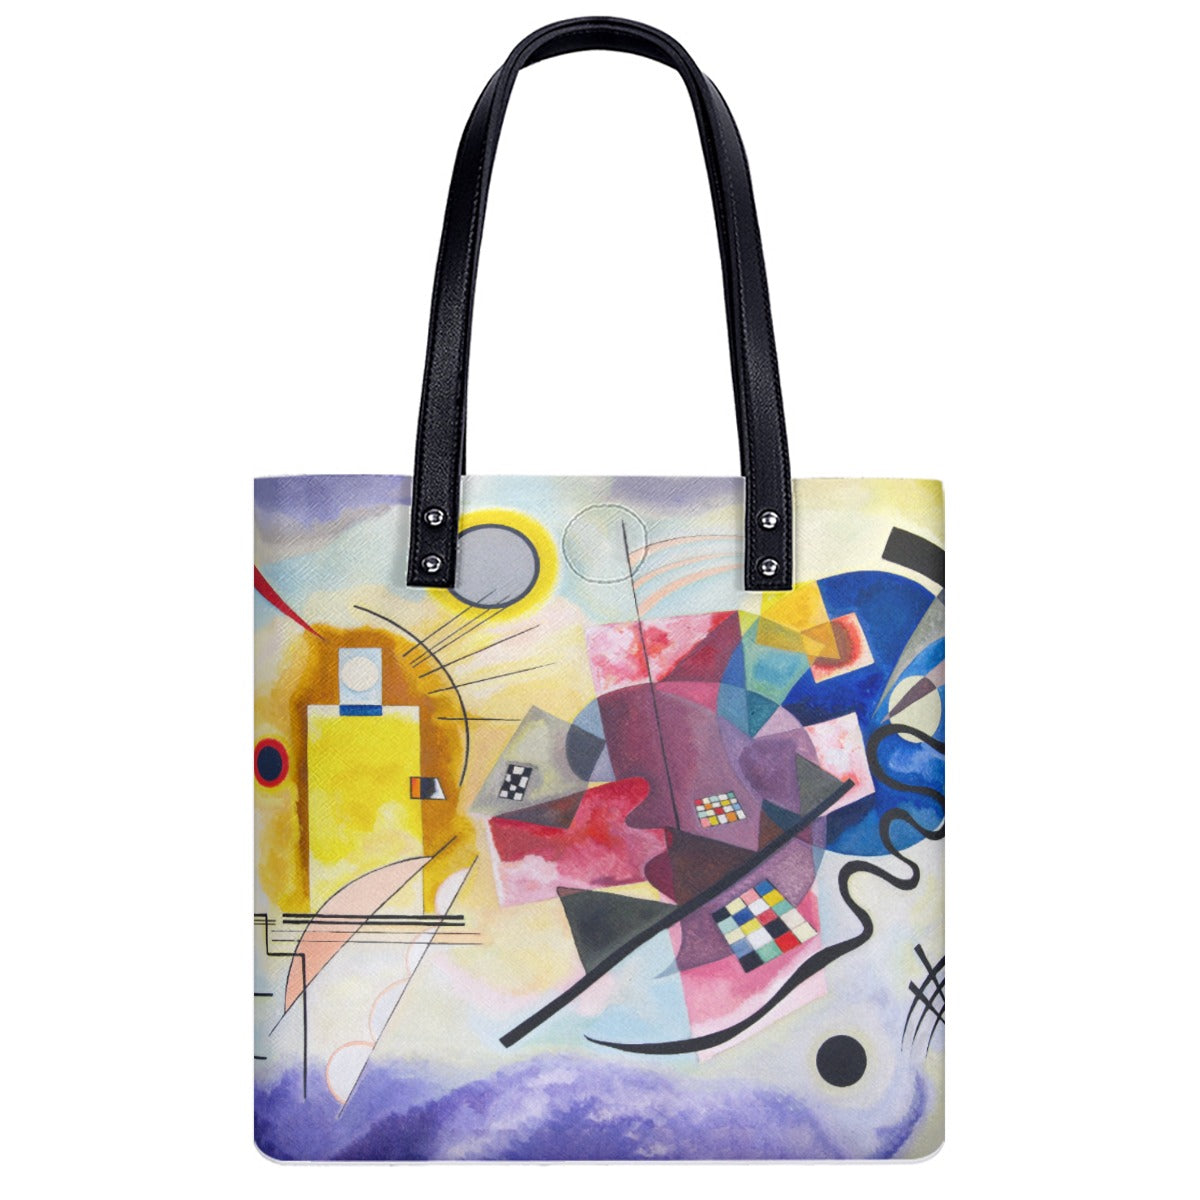 Abstract Artistic Tote - Vibrant Colors